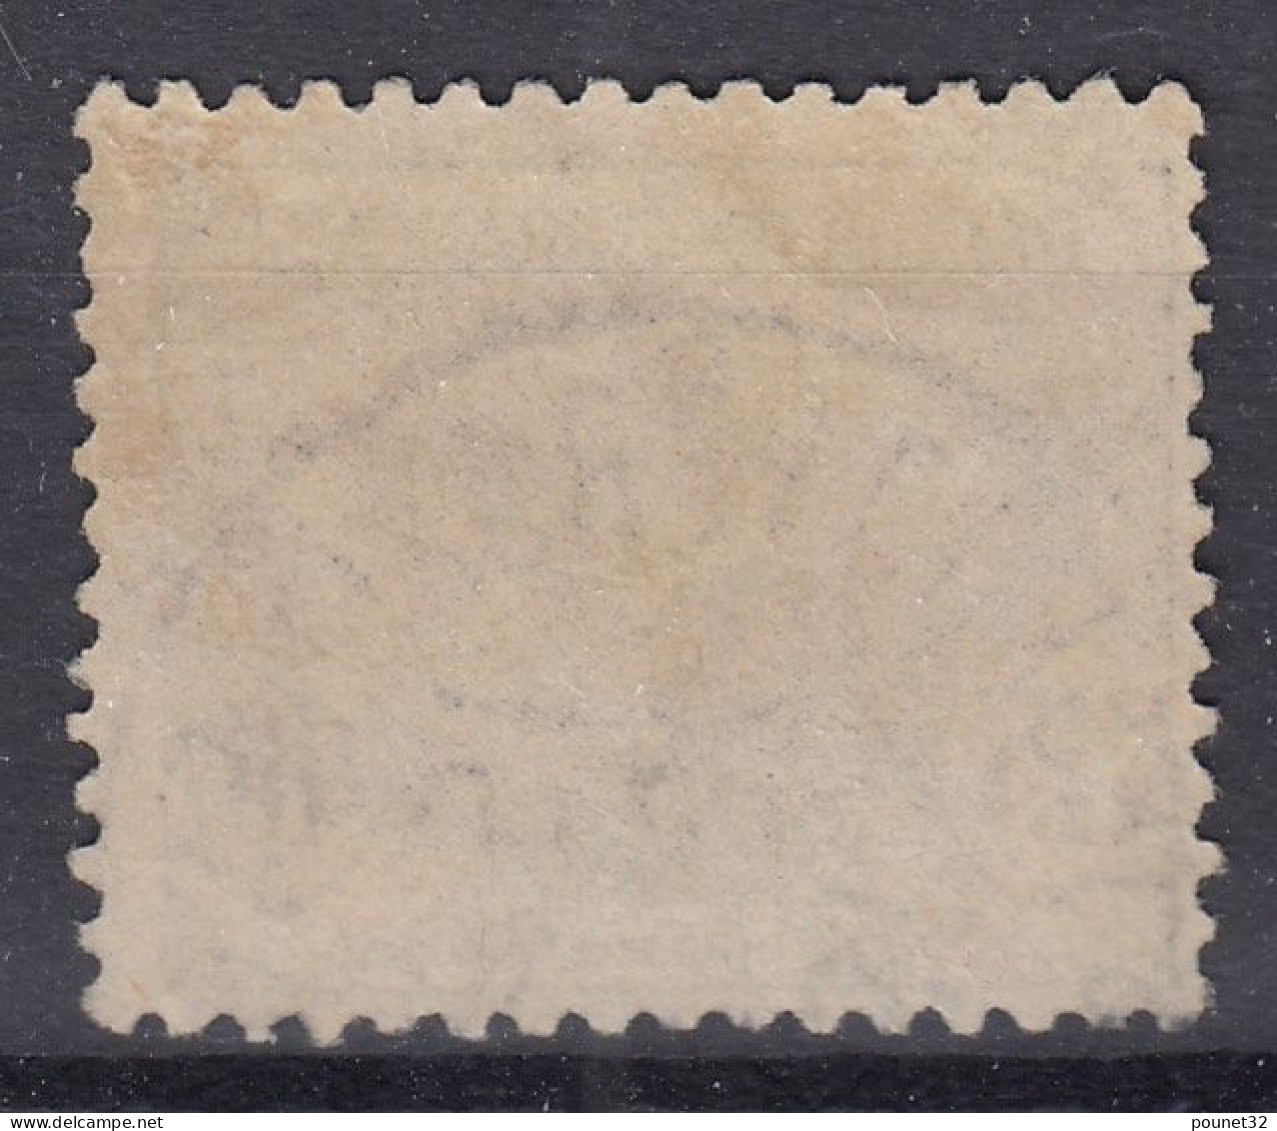 TIMBRE FRANCE 1ère ORPHELIN N° 150 OBLITERATION CHOISIE CONGRES DE VERSAILLES - Used Stamps